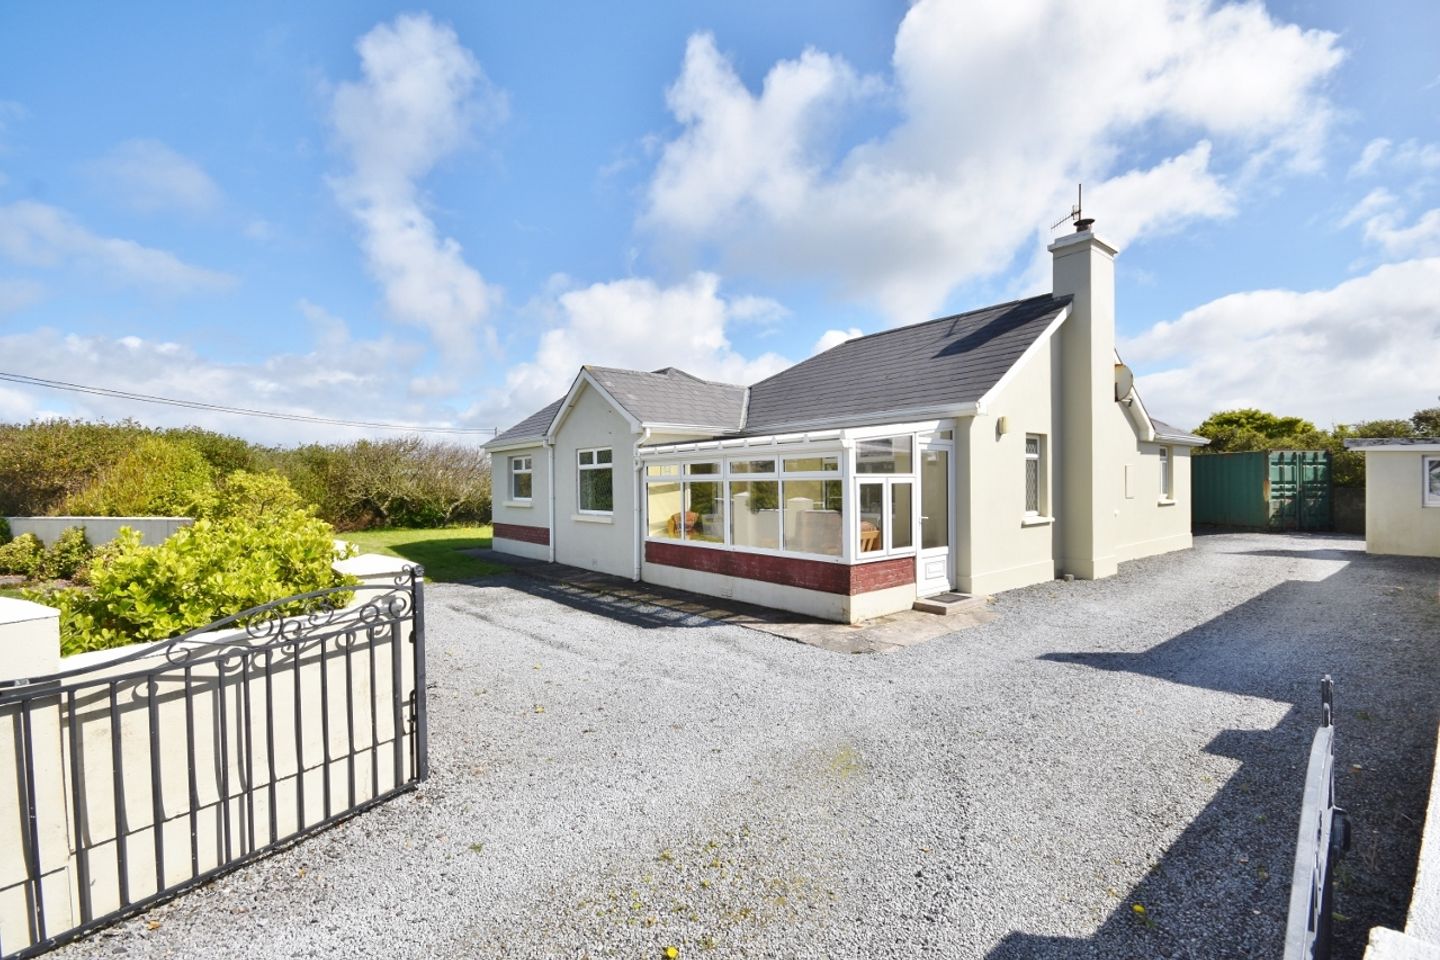 Ocean Cove, Sandhill Road, Ballybunion, Co. Kerry is for sale on Daft.ie